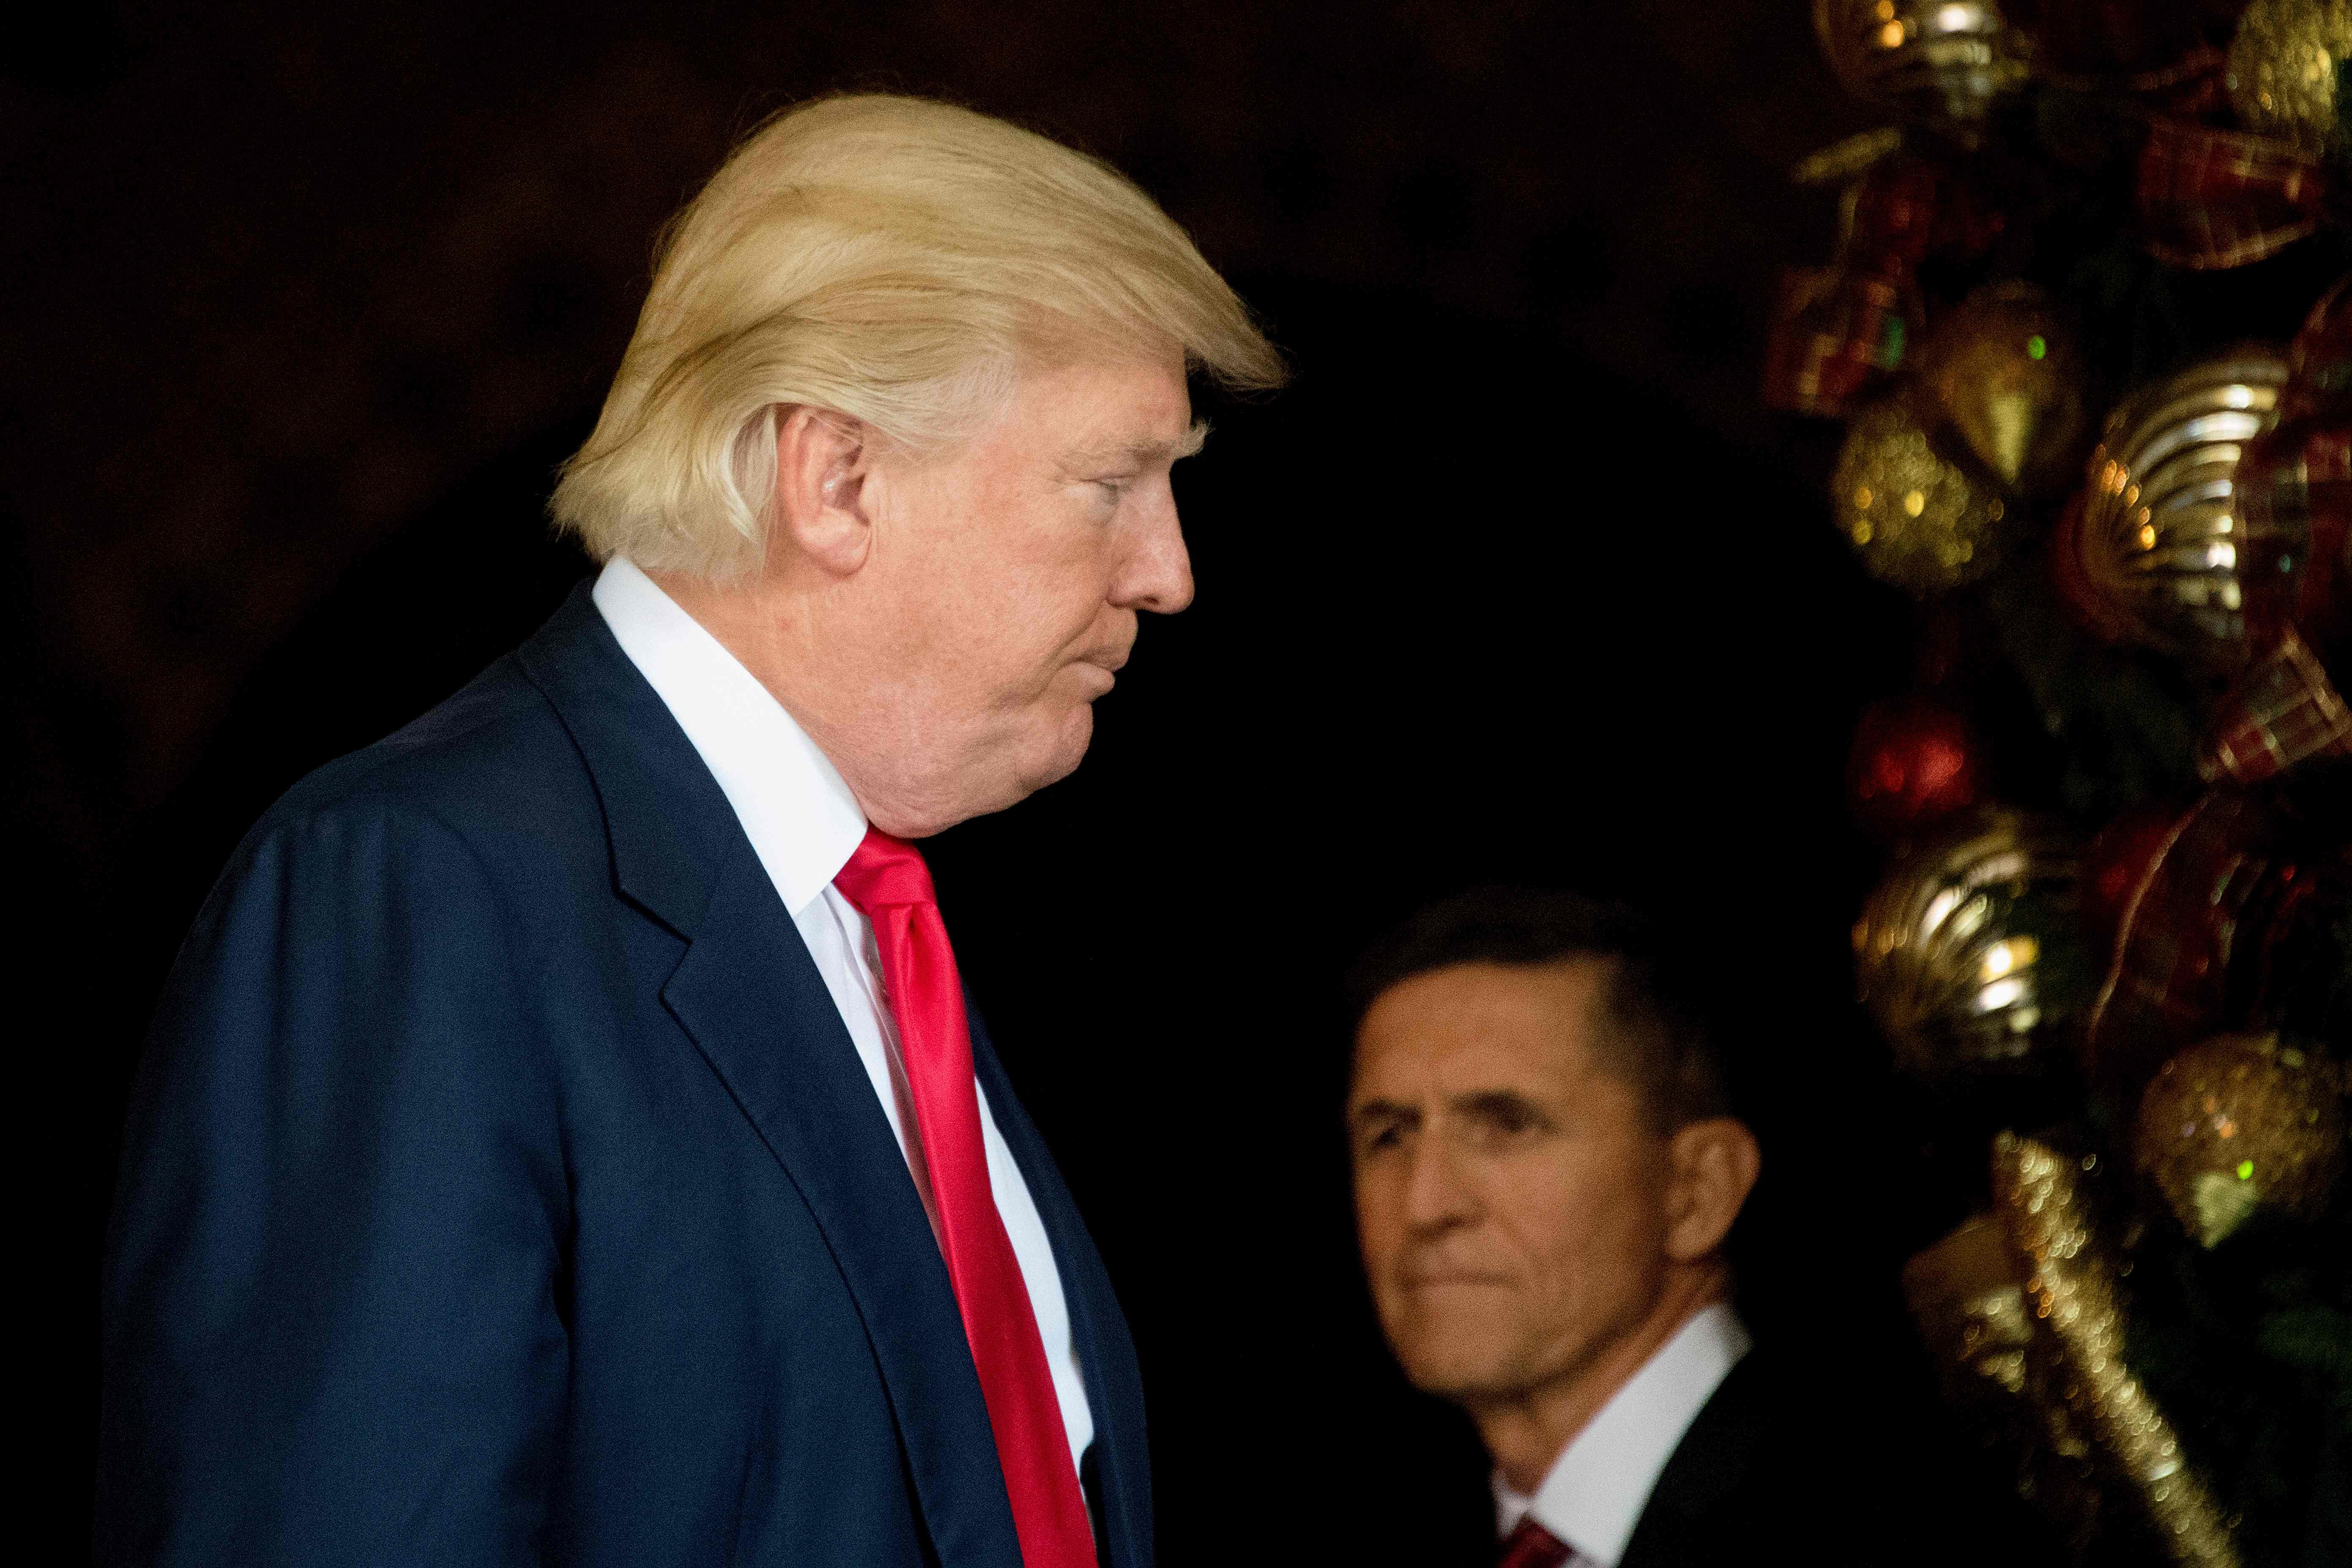 Donald Trump (L) stands with Michael Flynn at Mar-a-Lago. Photo: AFP